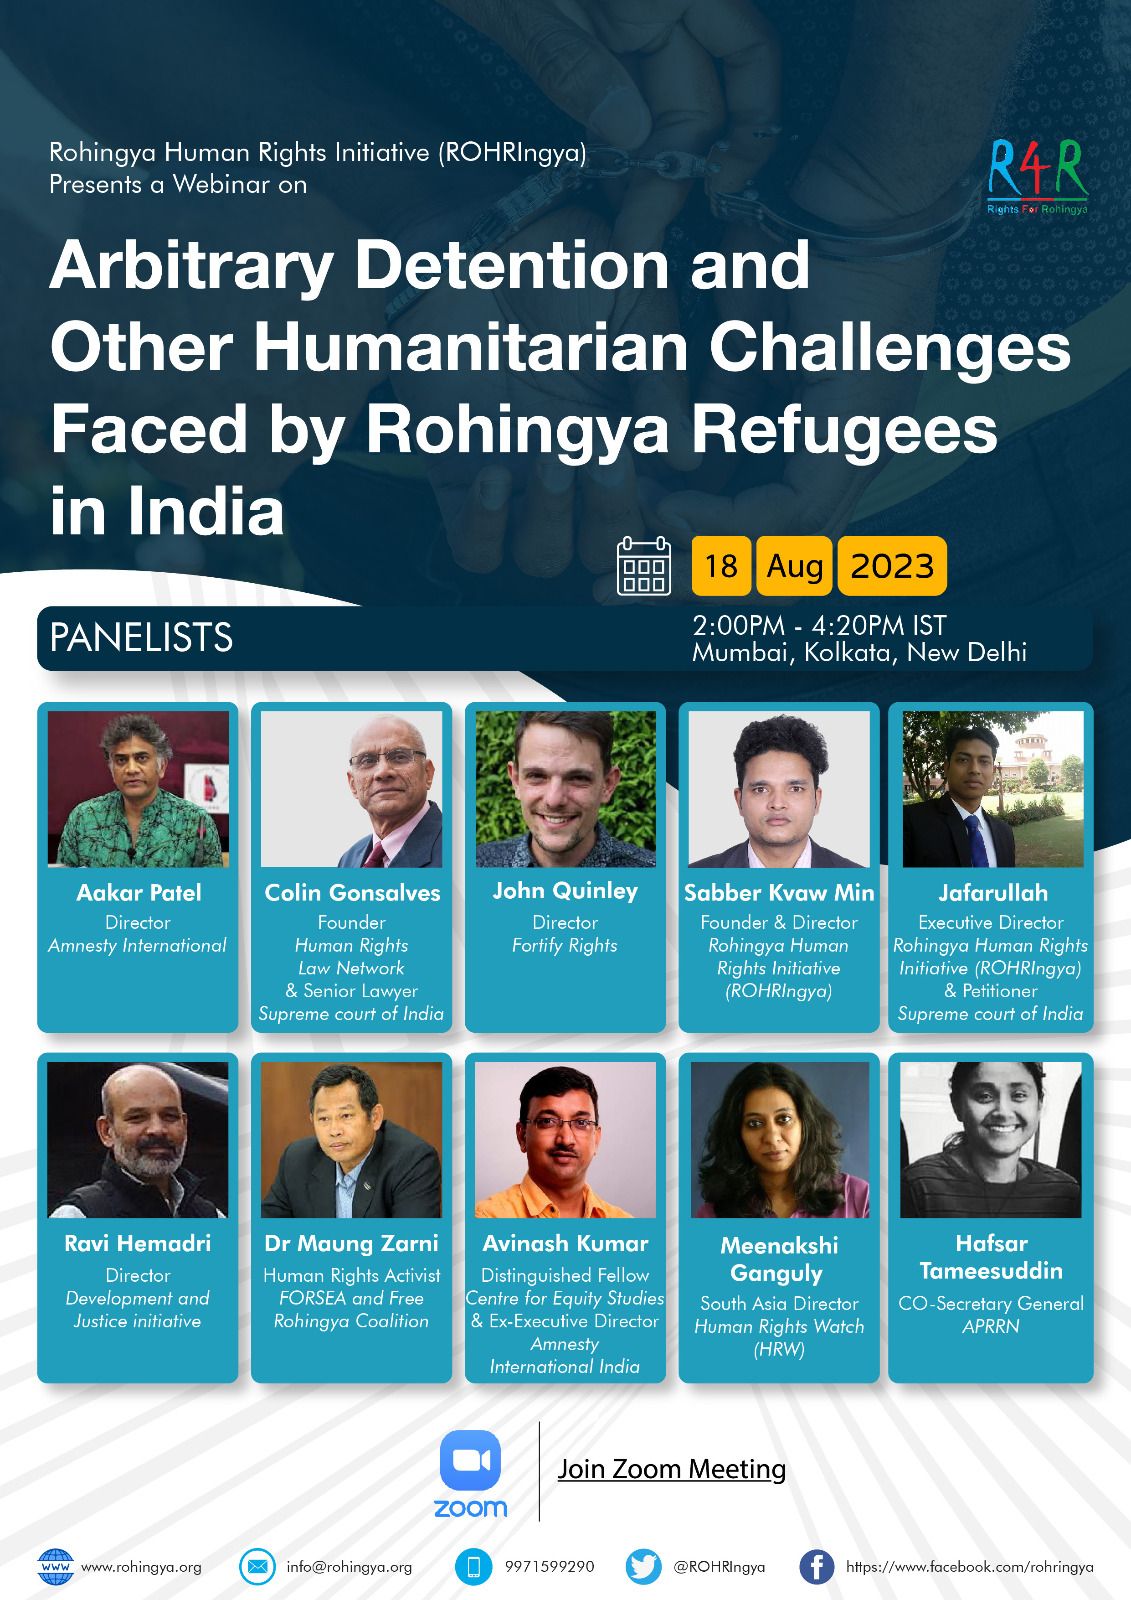 Detention and other Humanitarian Challenges Faced by Rohingya Refugees”in India on the 18 Aug 2023